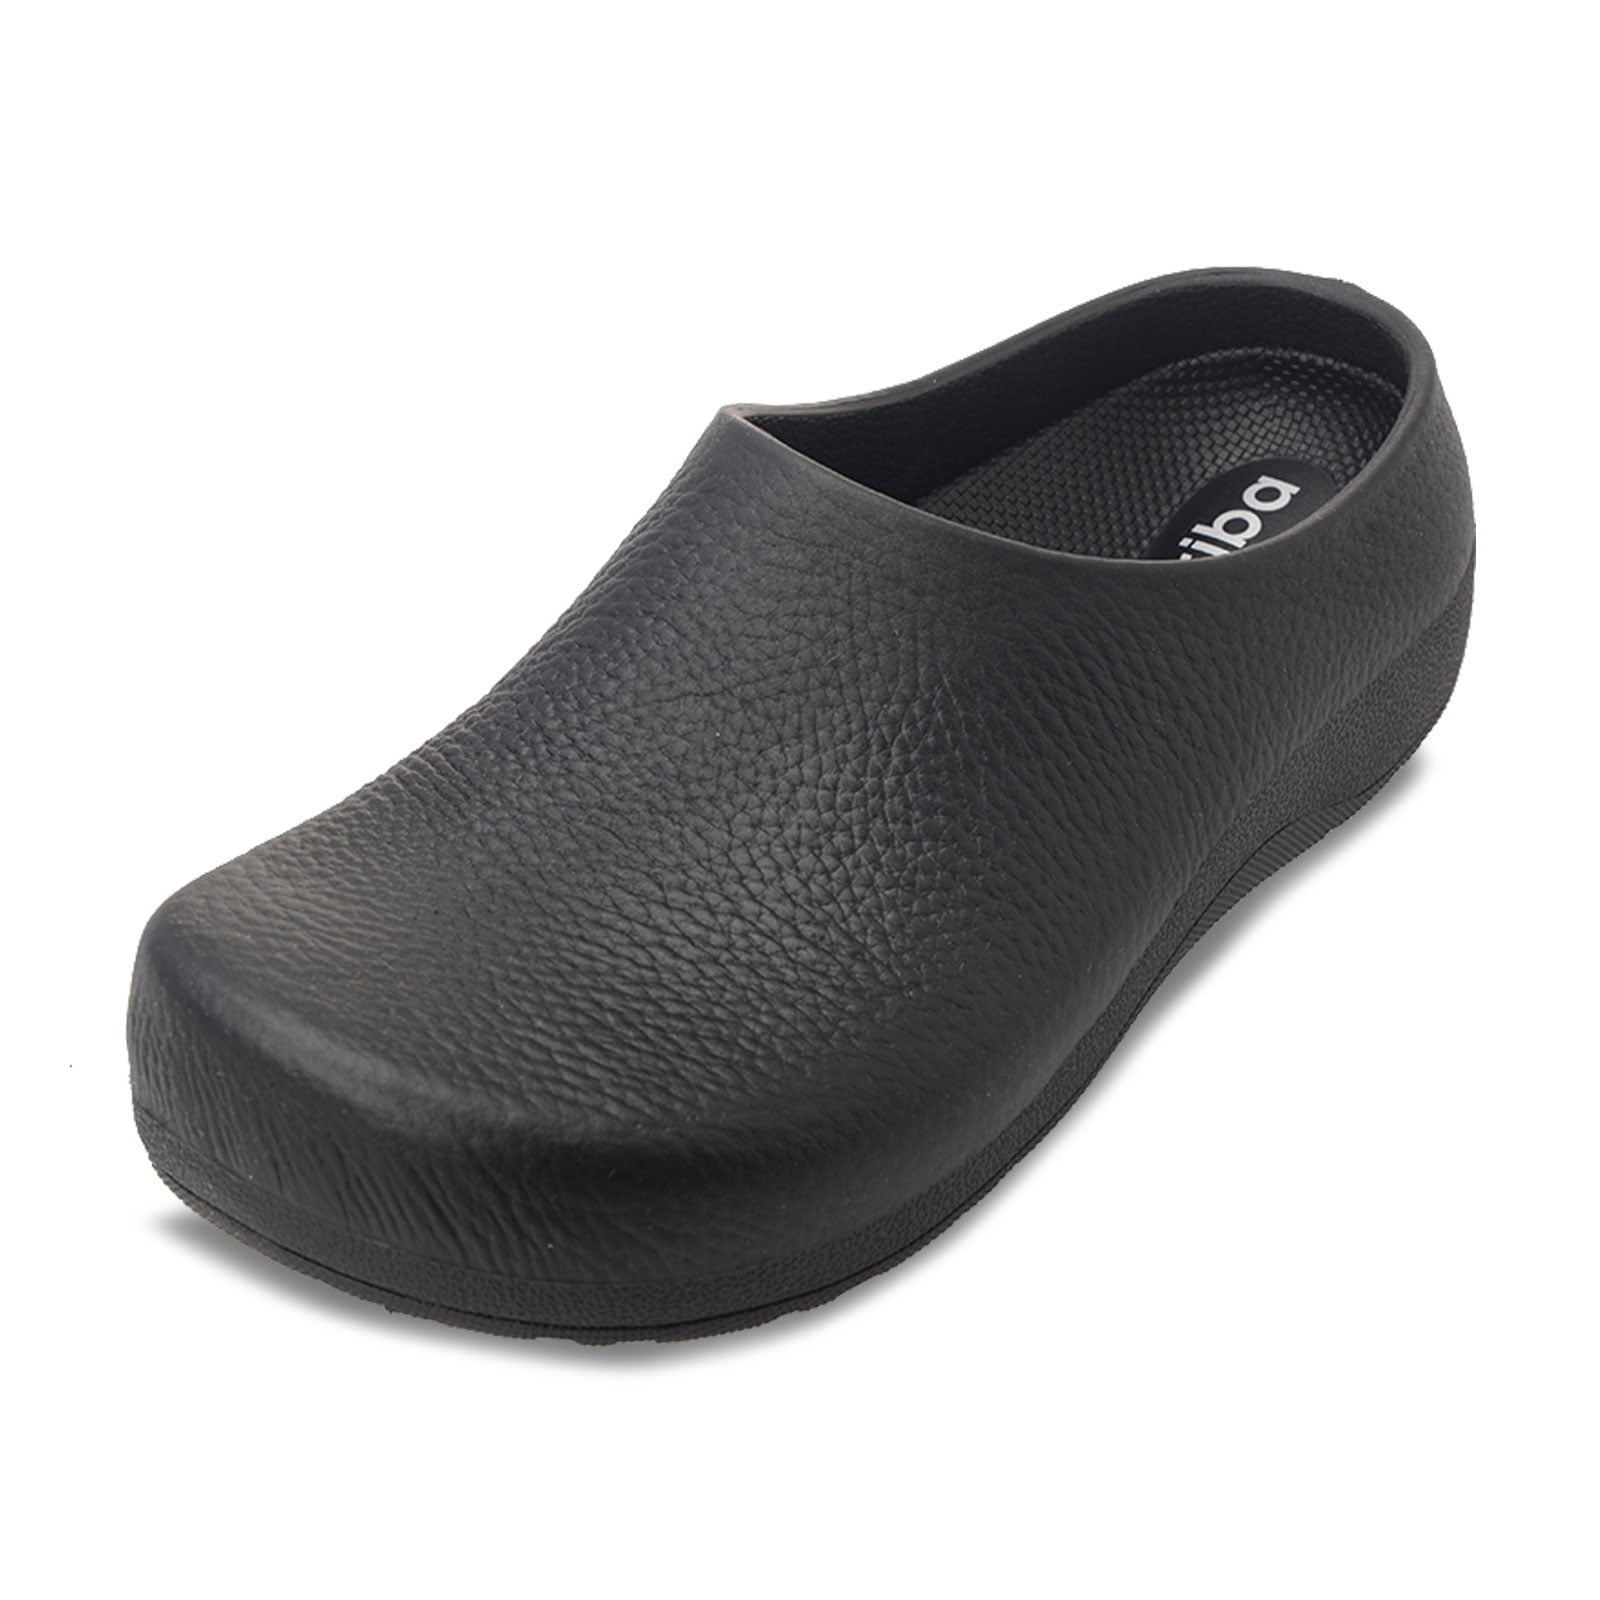 slip on work shoes womens